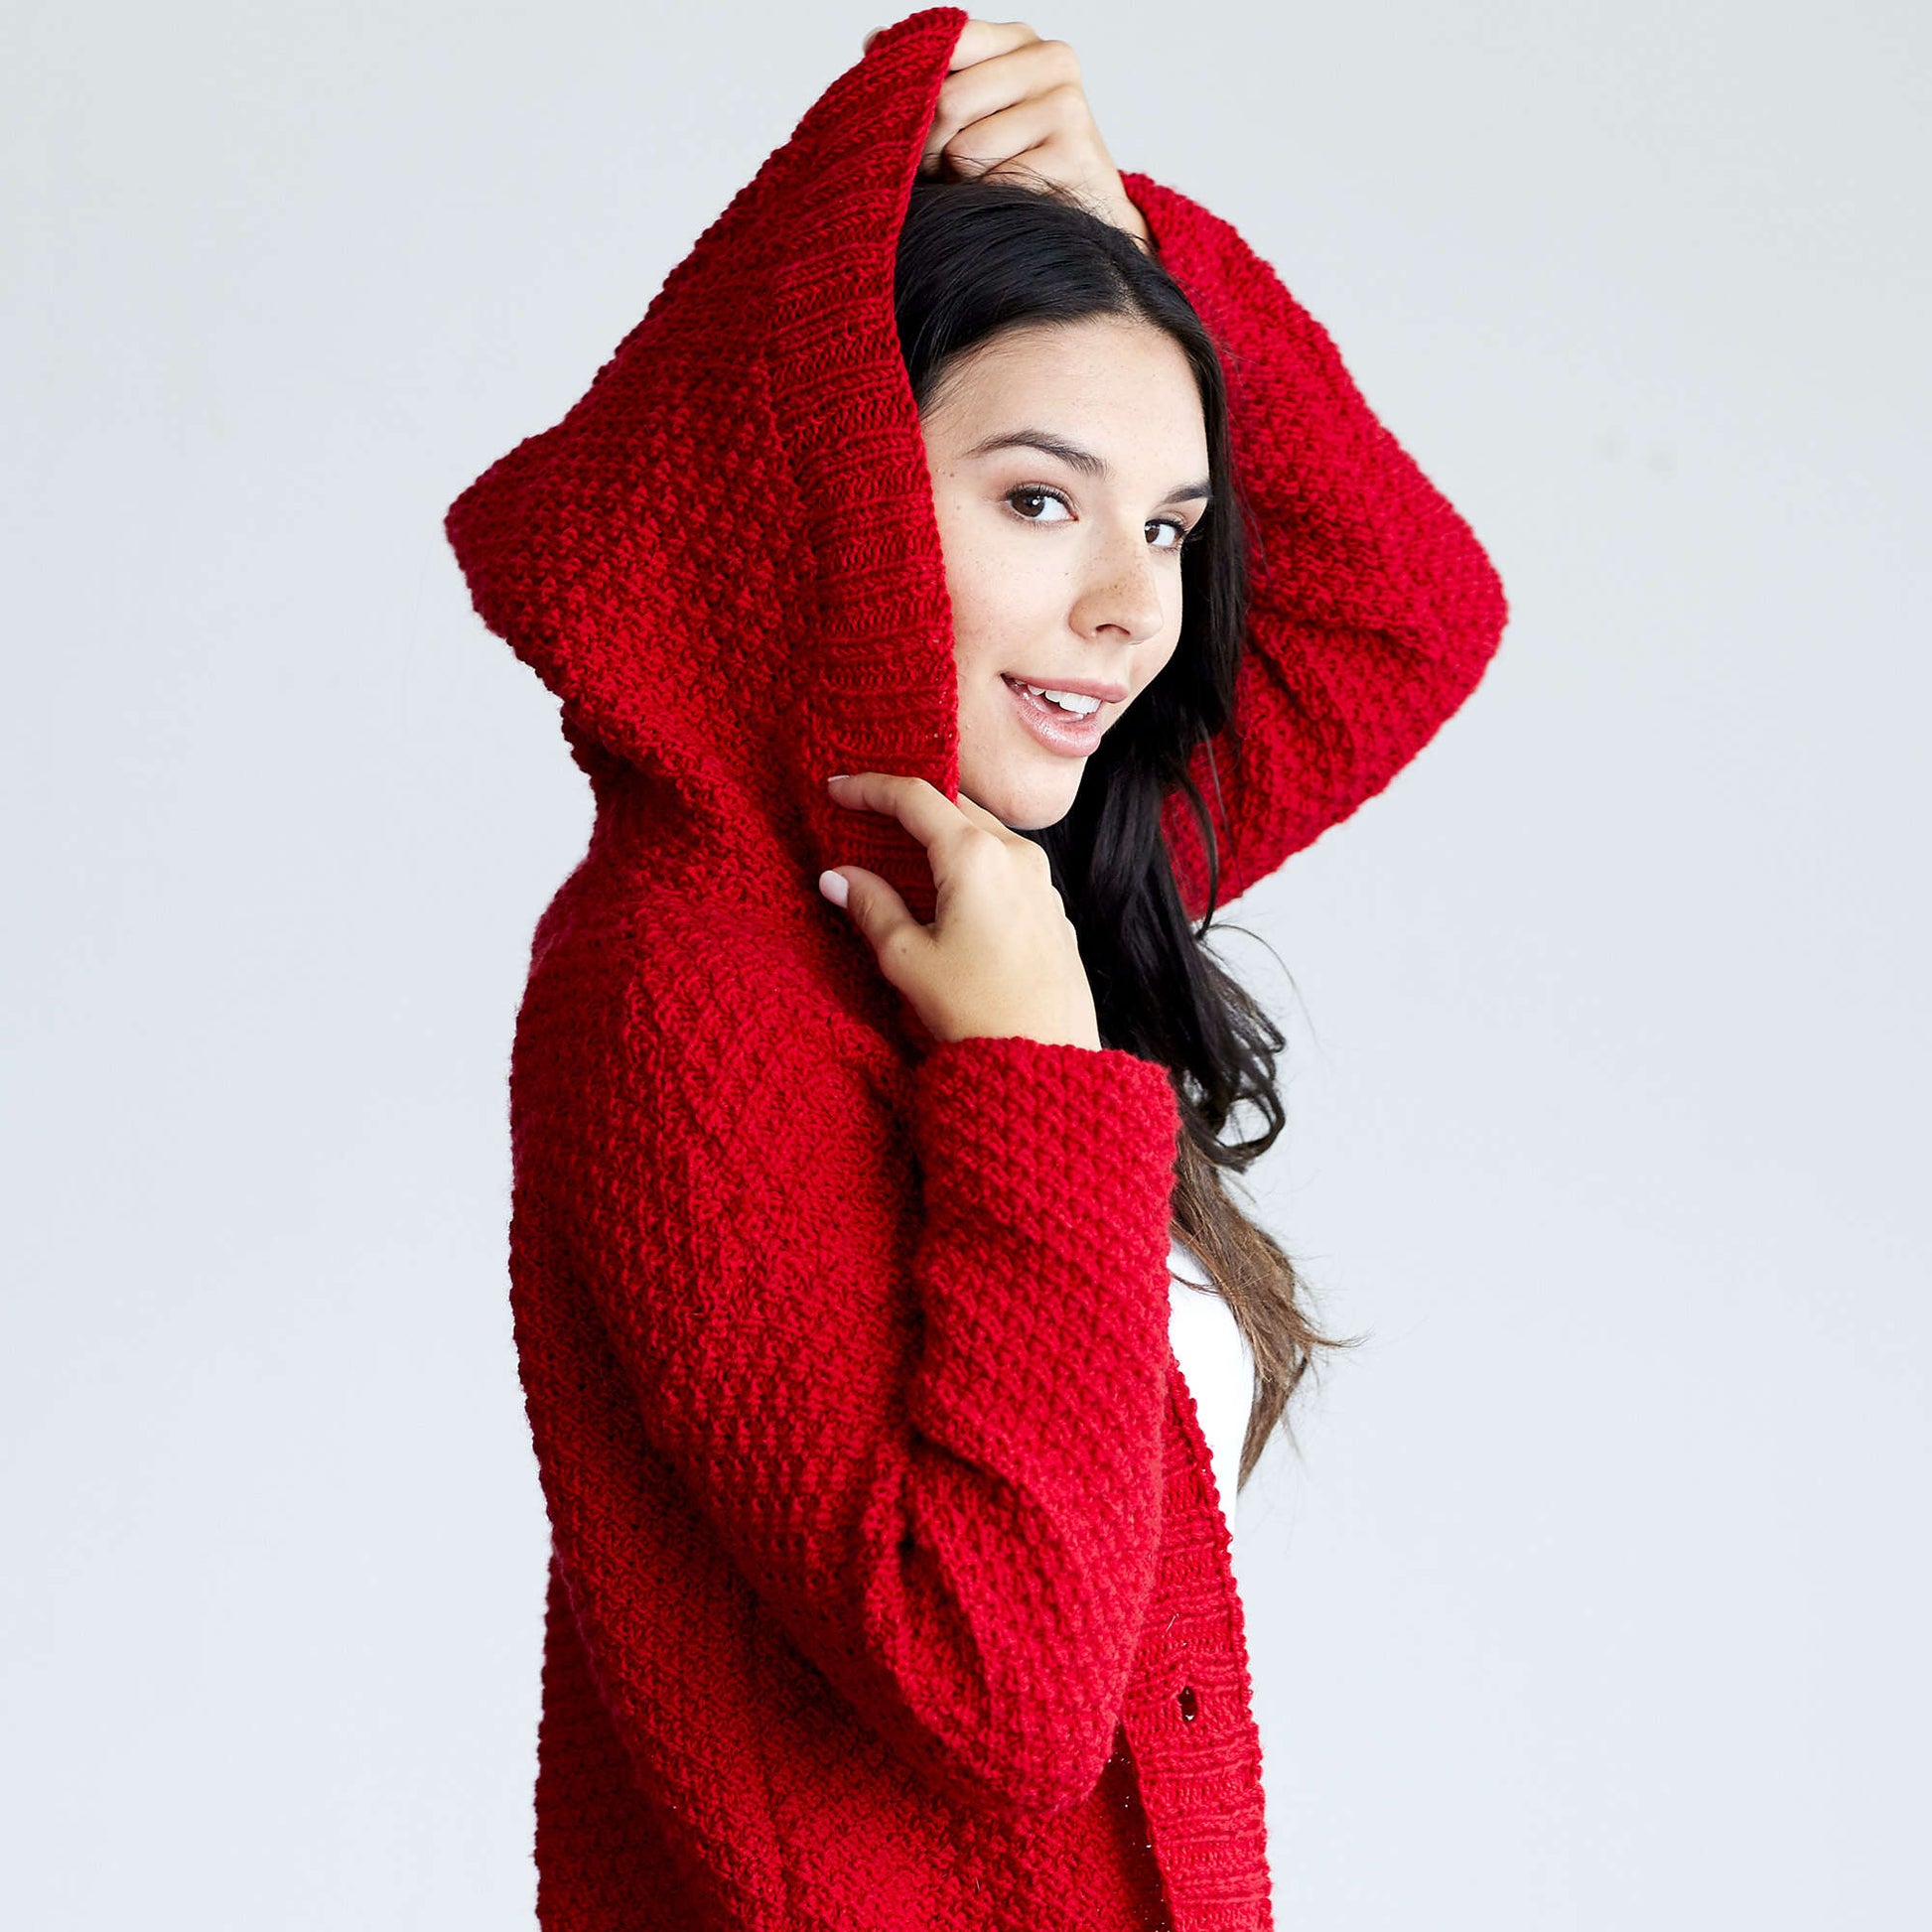 Free Red Heart Lazy Day Chic Sweater Pattern